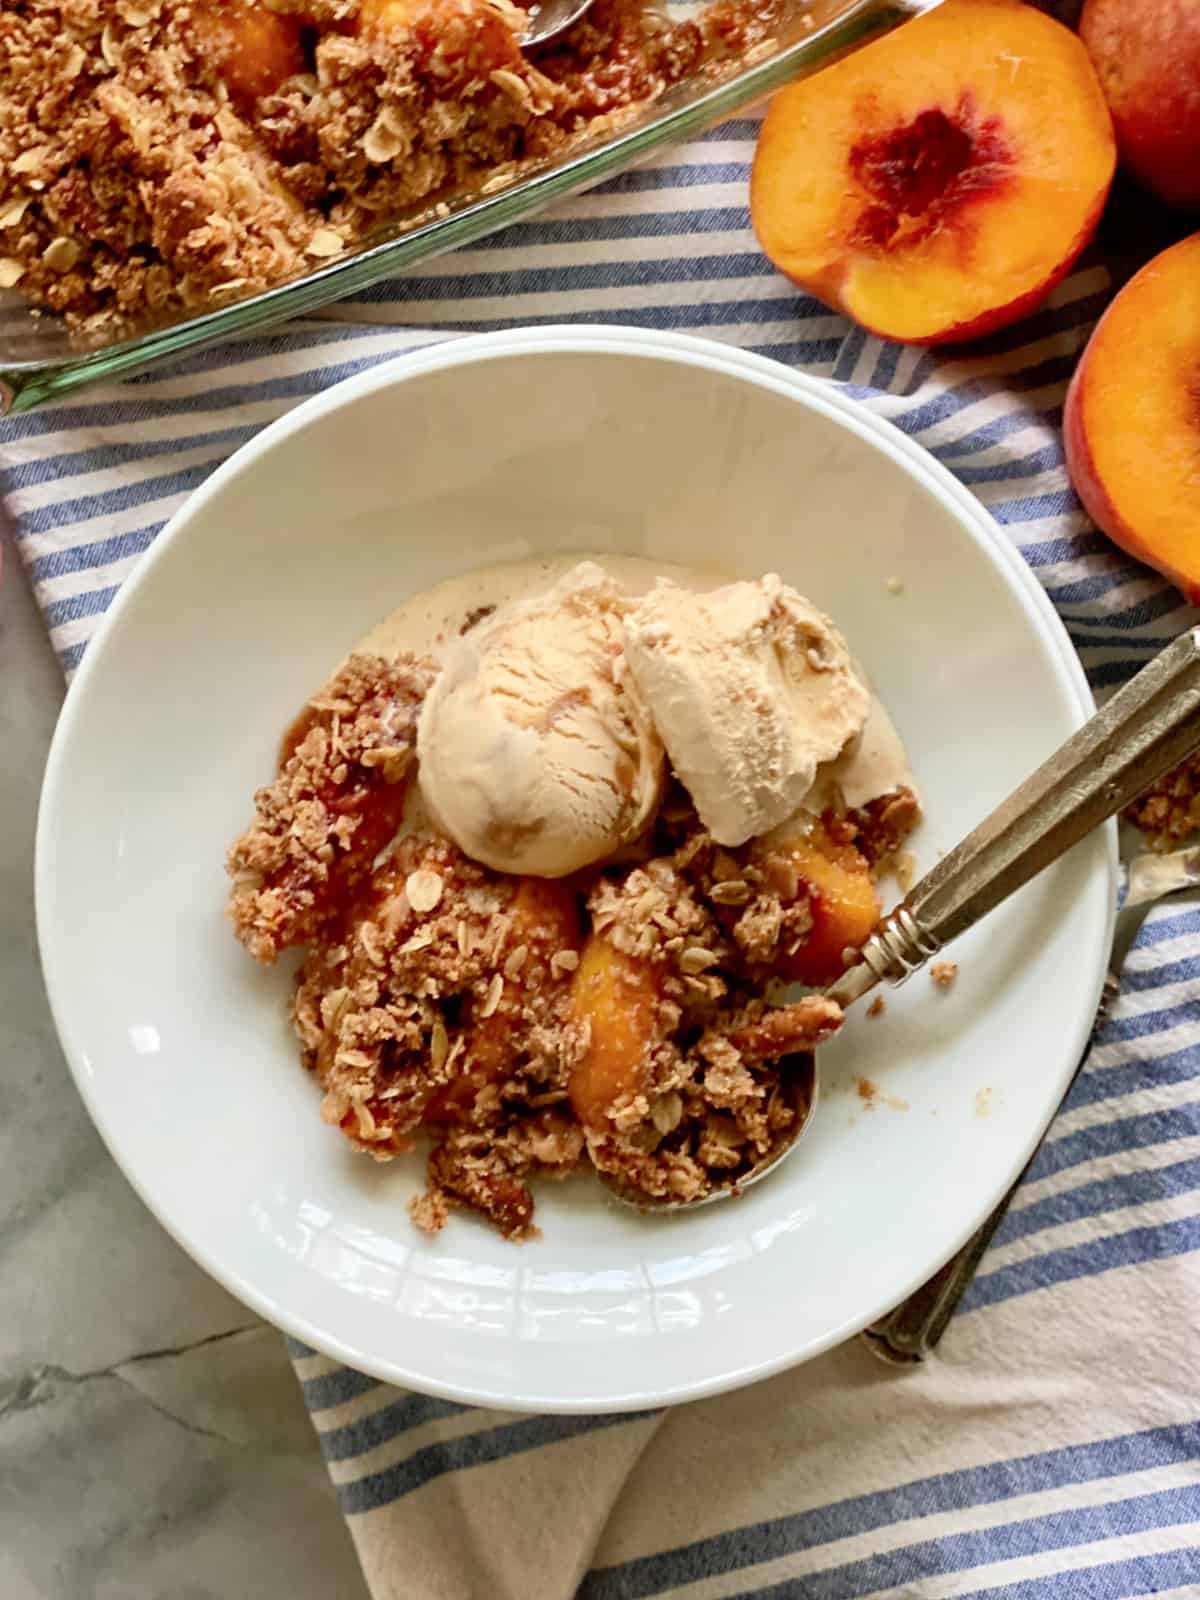 Top view of peach crisp with ice cream in a shallow white bowl filled with fresh peaches around it.